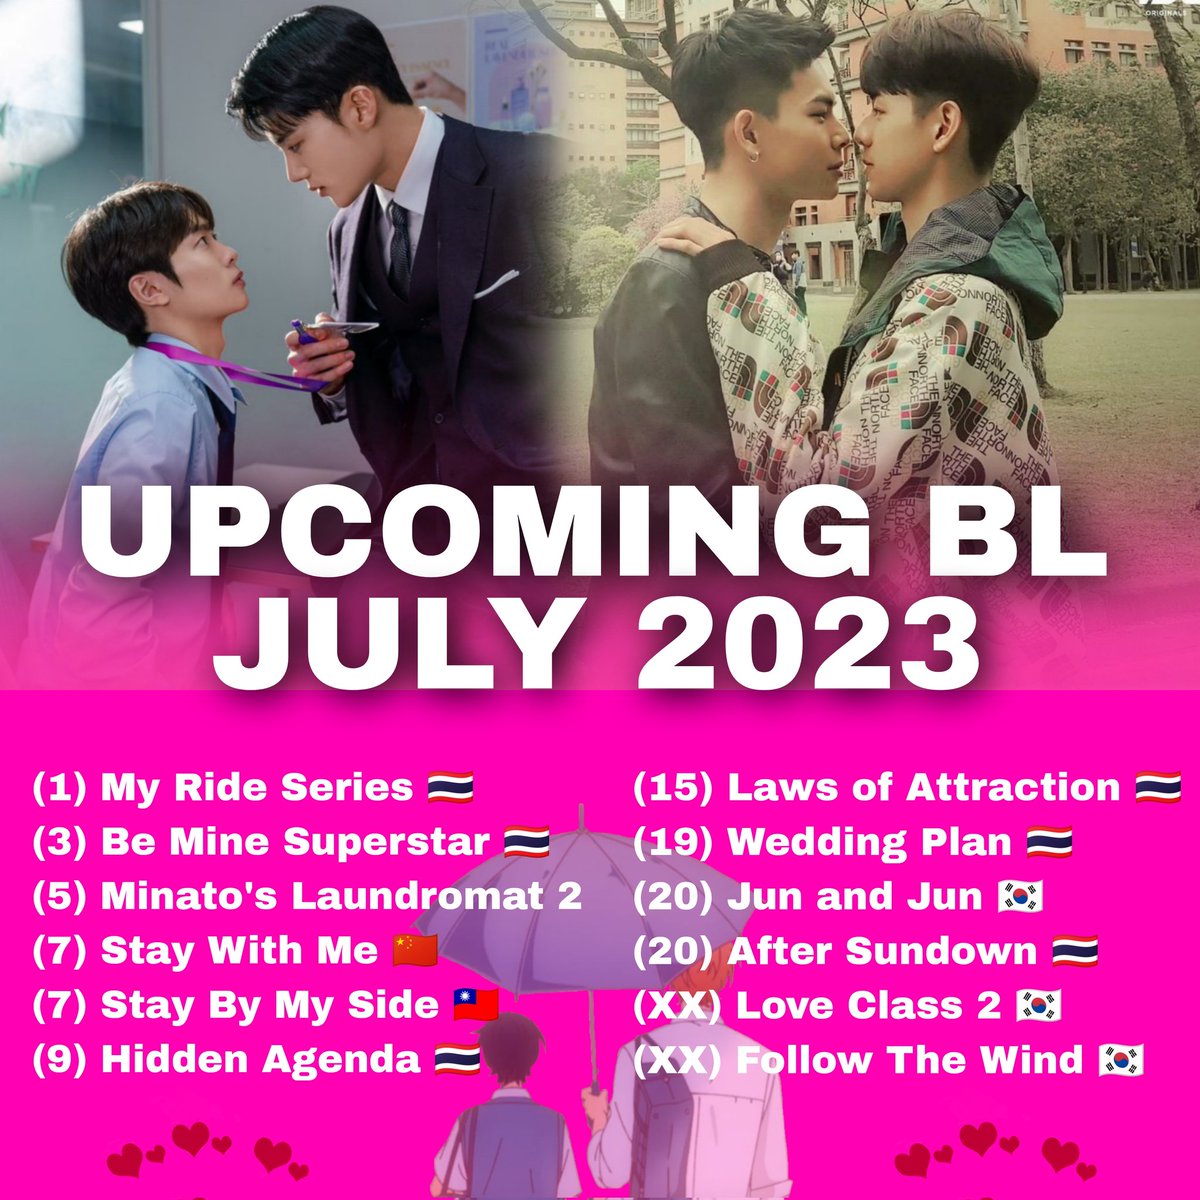 Got lots to catch! Upcoming BL July 2023... Subscribe and follow me on Instagram @bl_family._ 

#upcomingbljuly2023 #upcomingbl